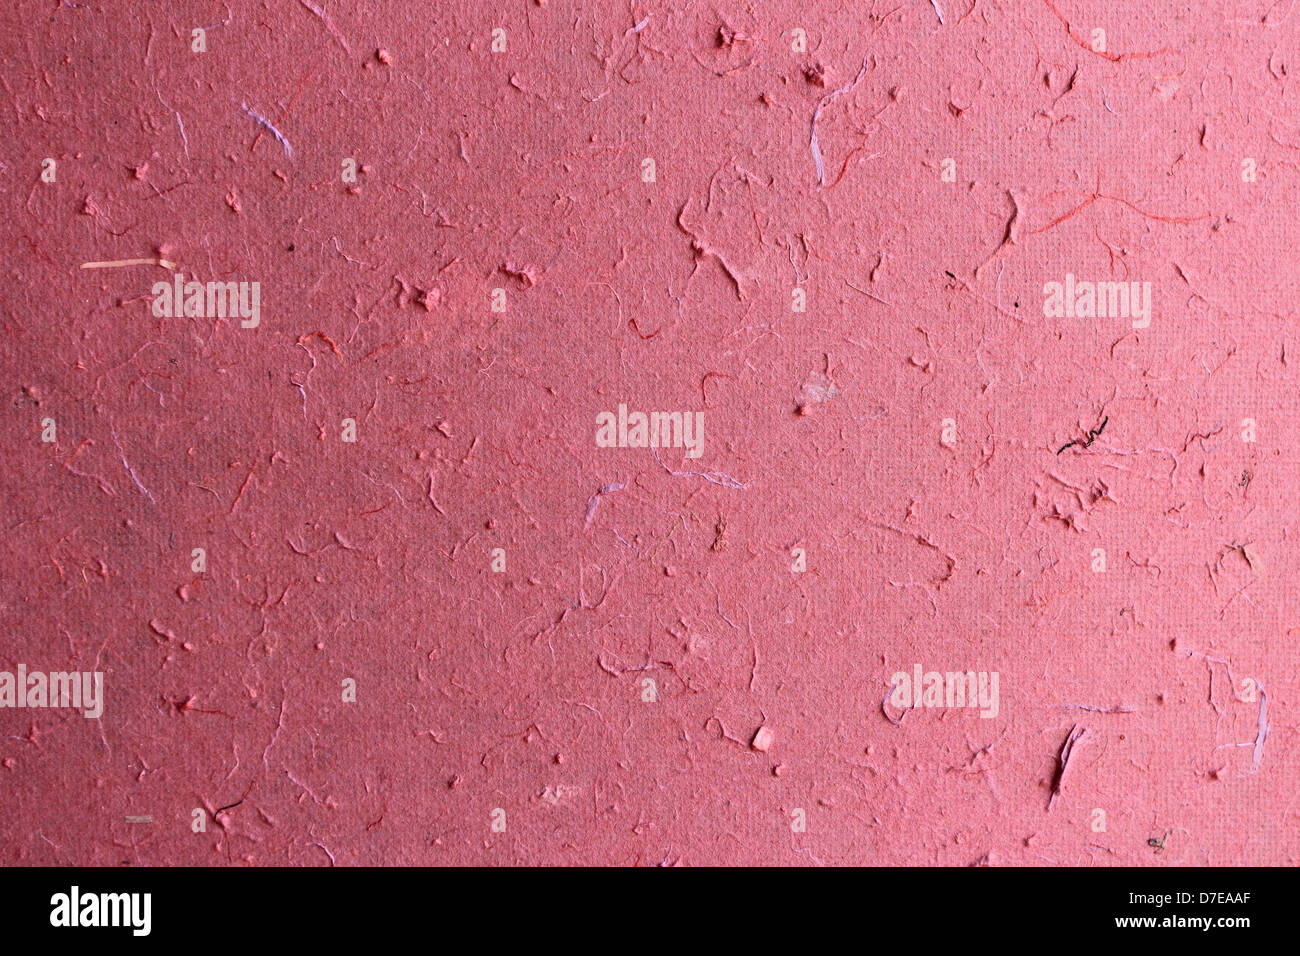 Pink handmade mulberry paper texture background Stock Photo